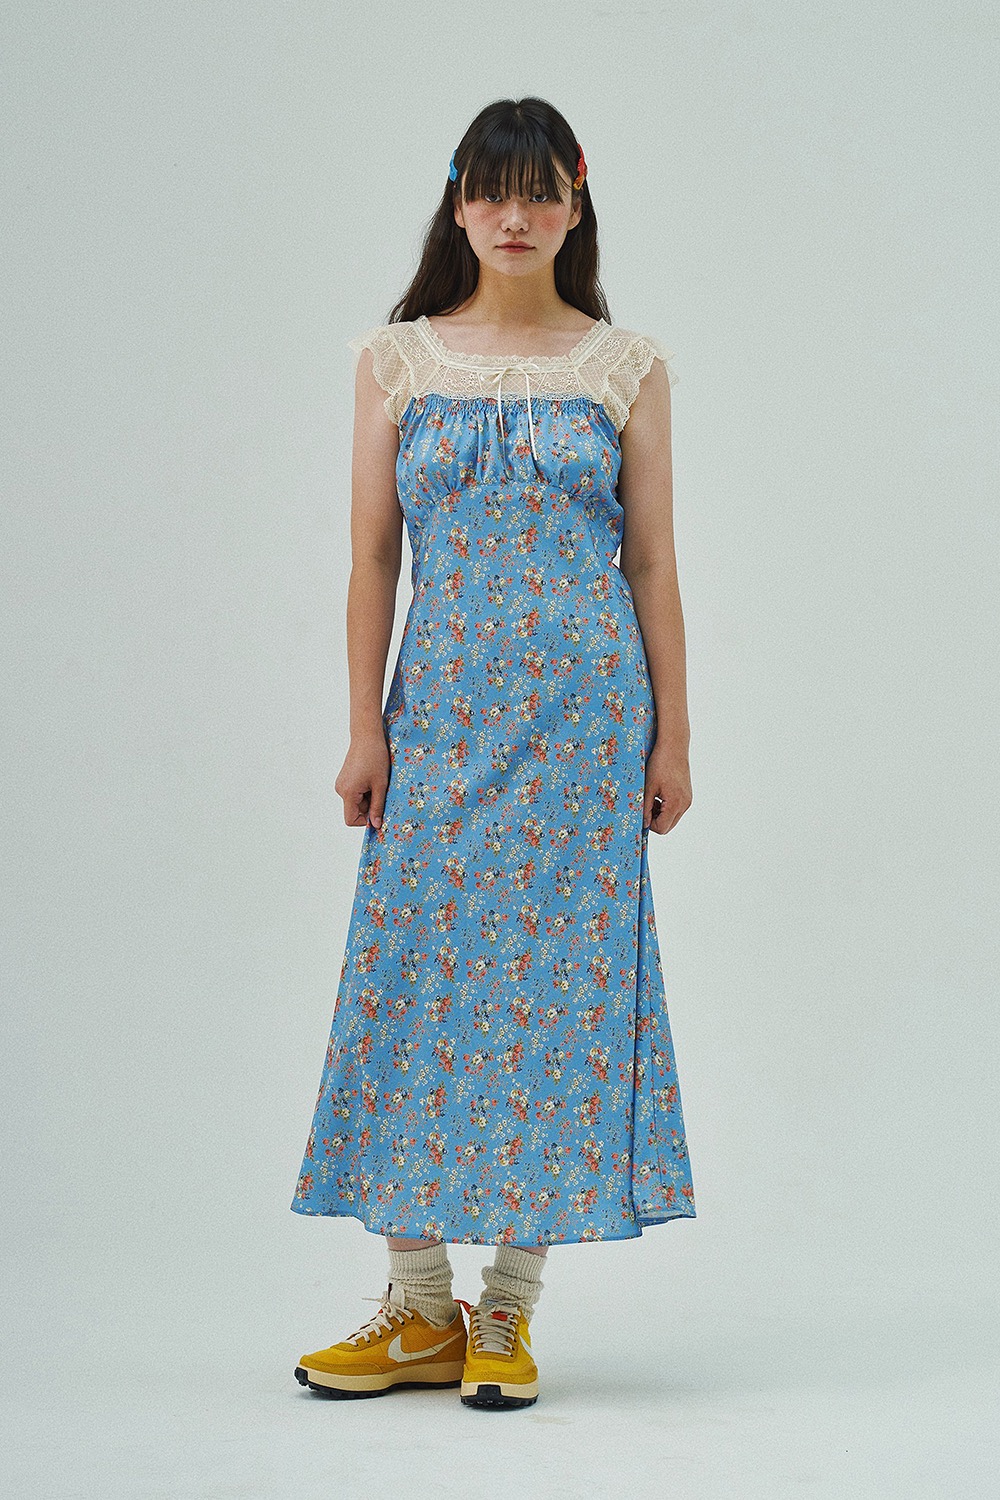 Isabella Dress (French Blue)